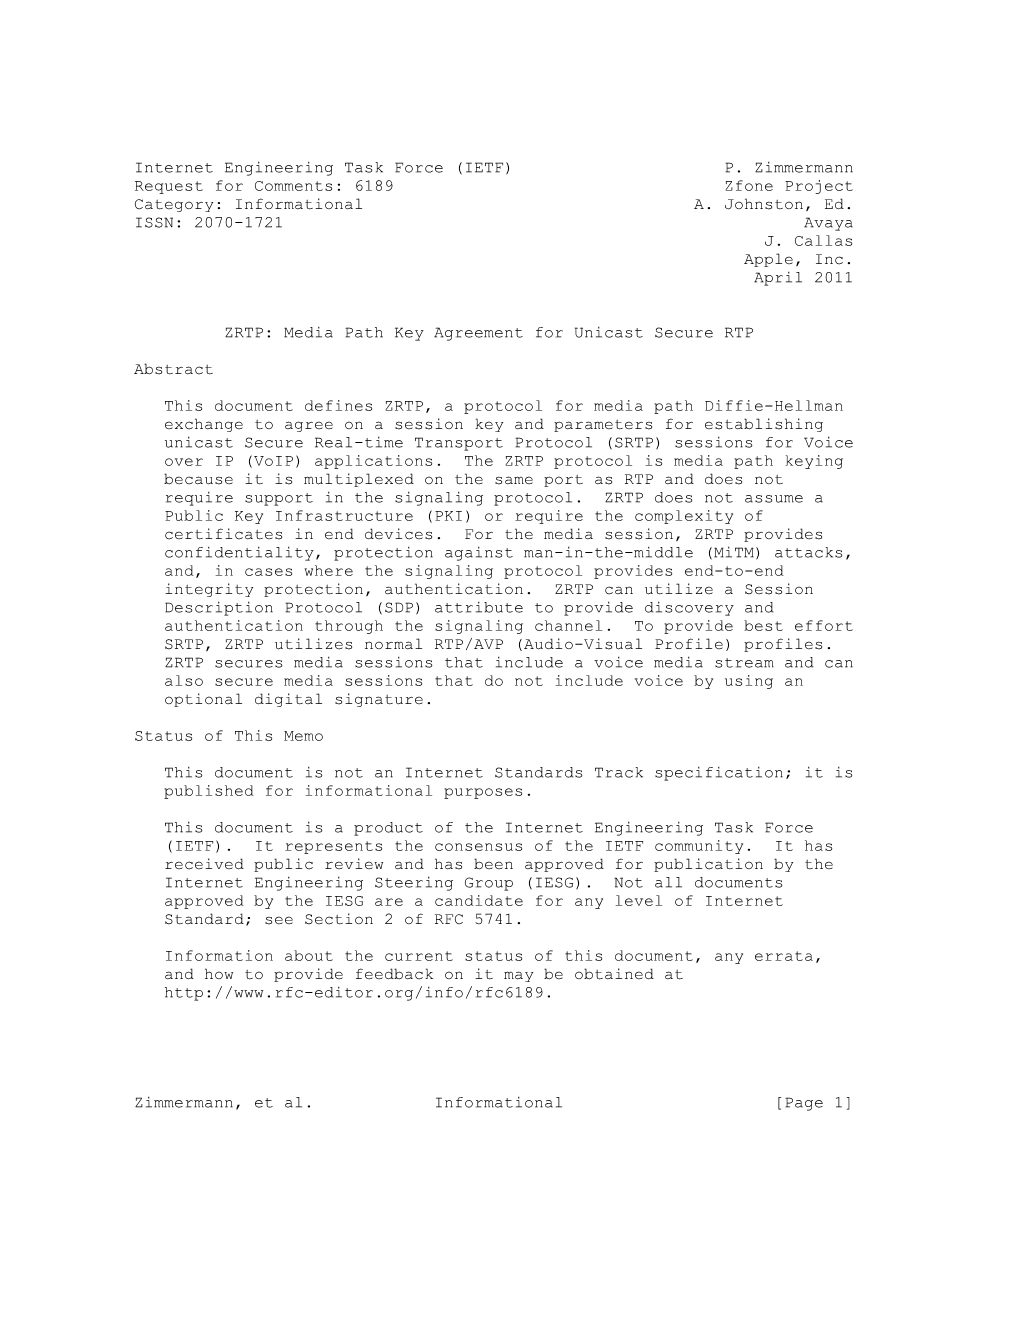 (IETF) P. Zimmermann Request for Comments: 6189 Zfone Project Category: Informational A